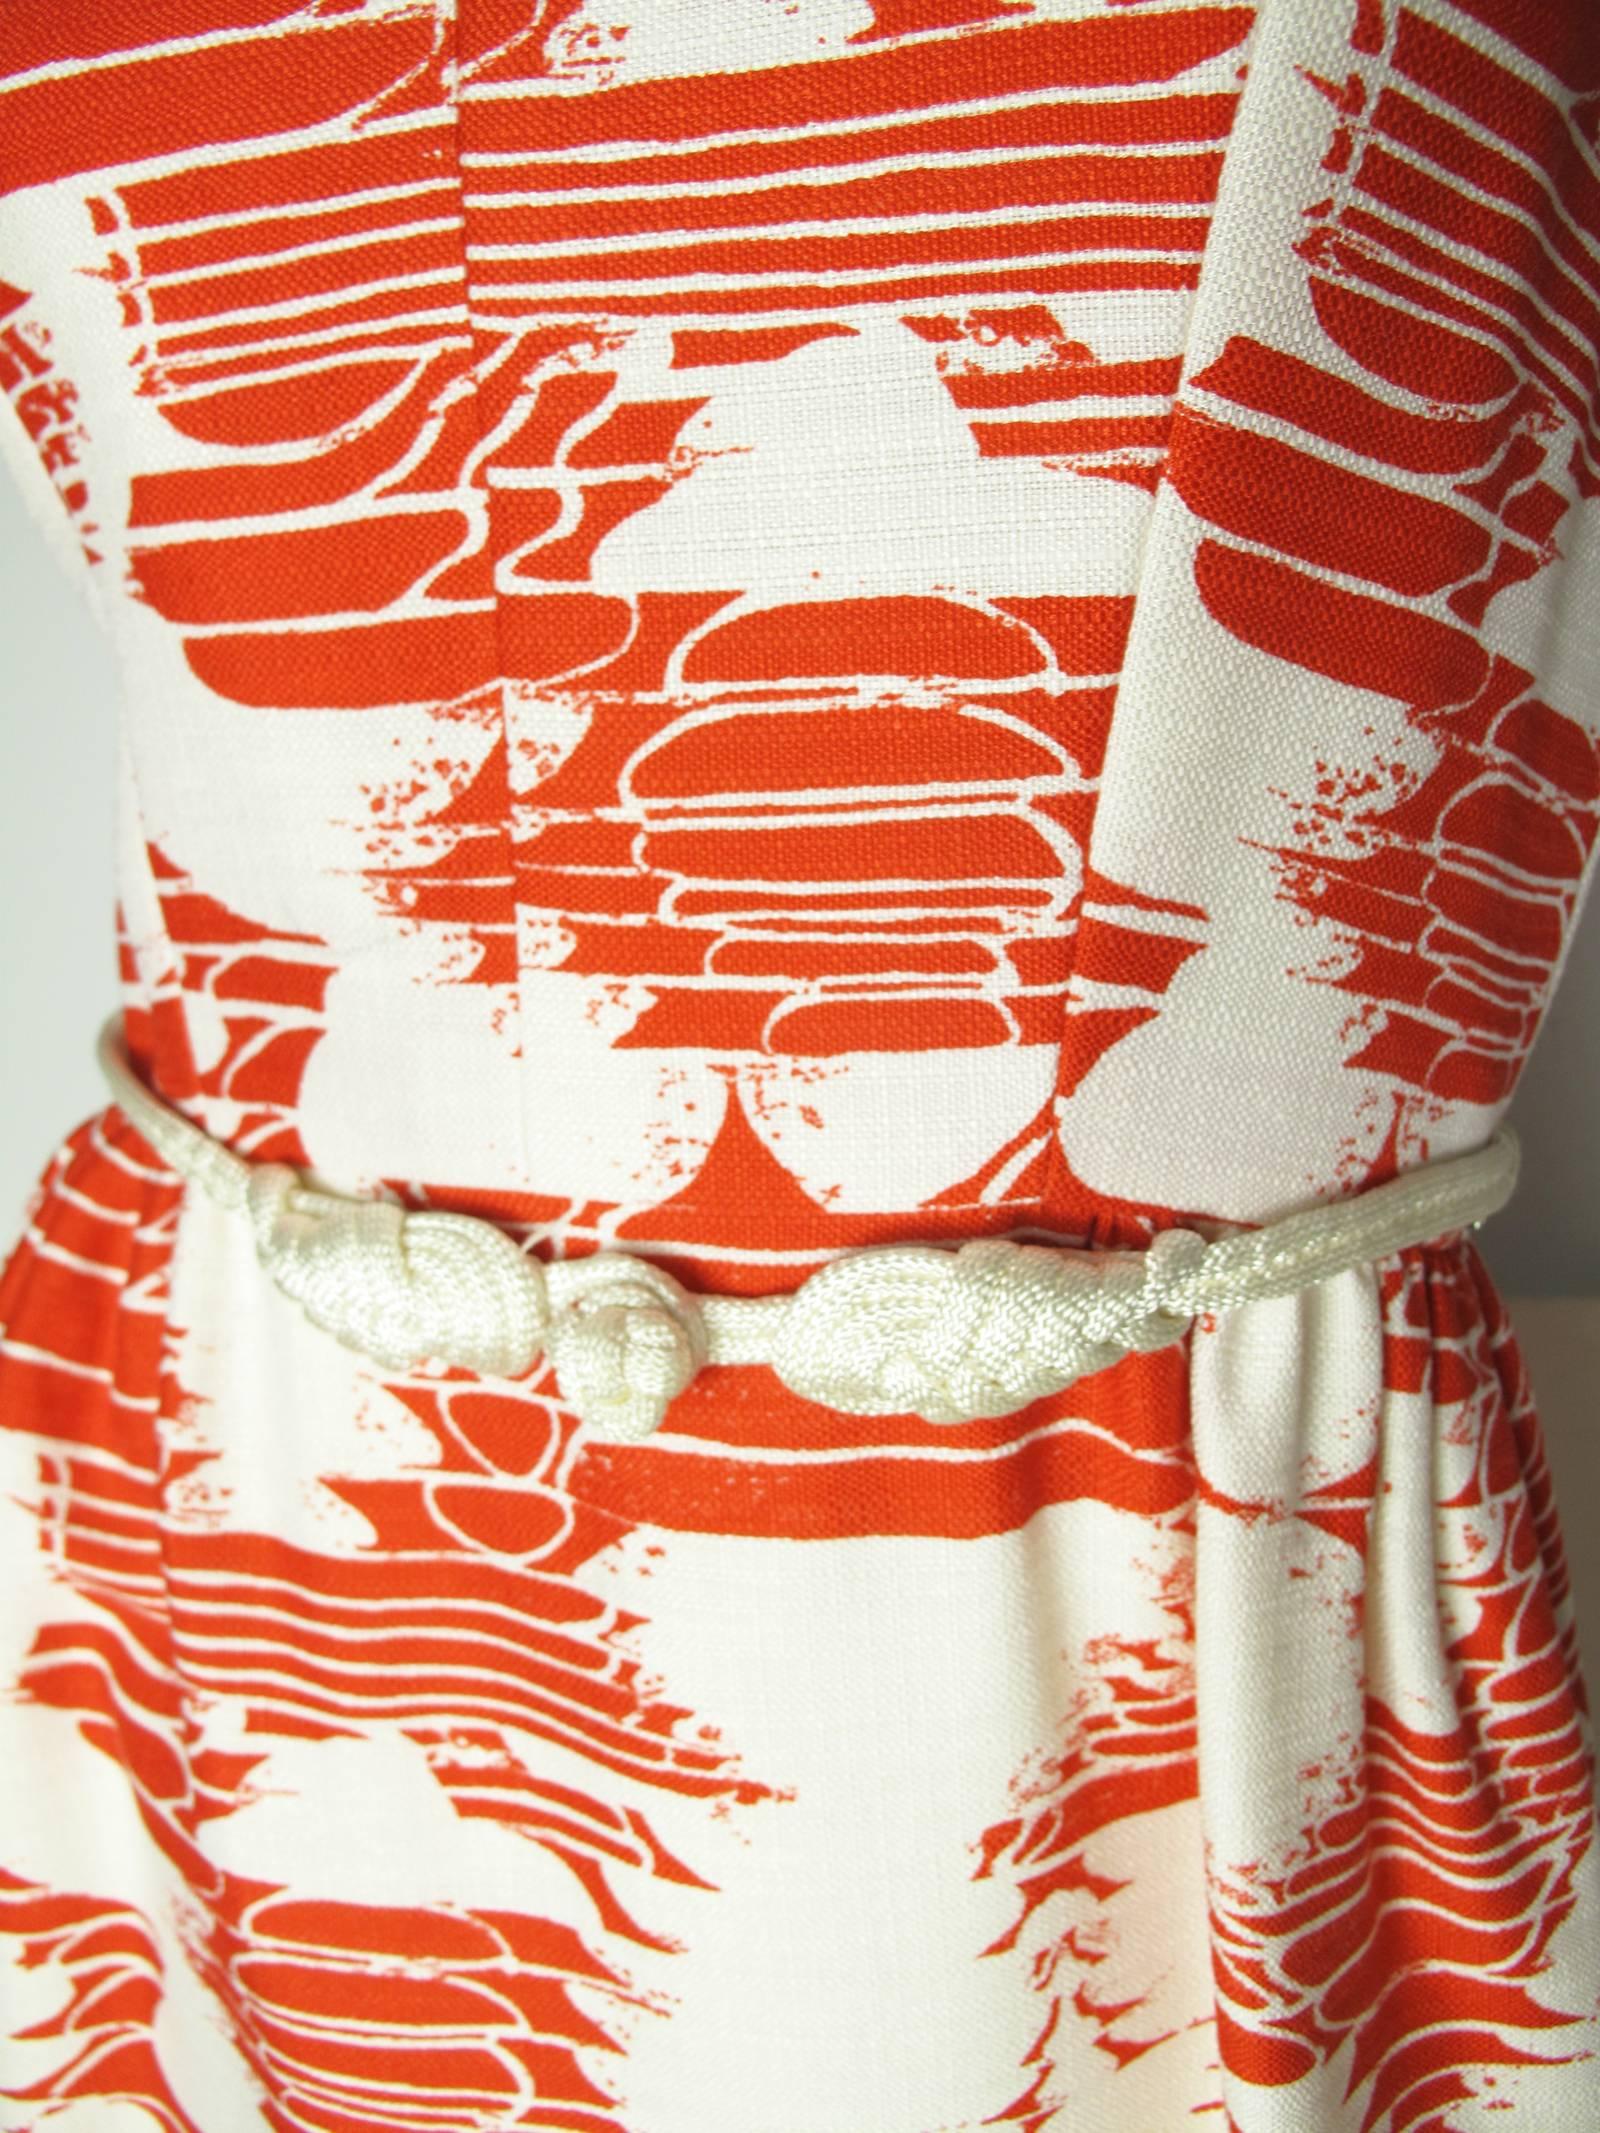 1960s Adele Simpson red and white linen dress with rope belt and side pockets, v neck, zipper at back. Condition: Excellent. Size Medium

We accept returns for refund, please see our terms.  We offer free ground shipping within the US.  Please let